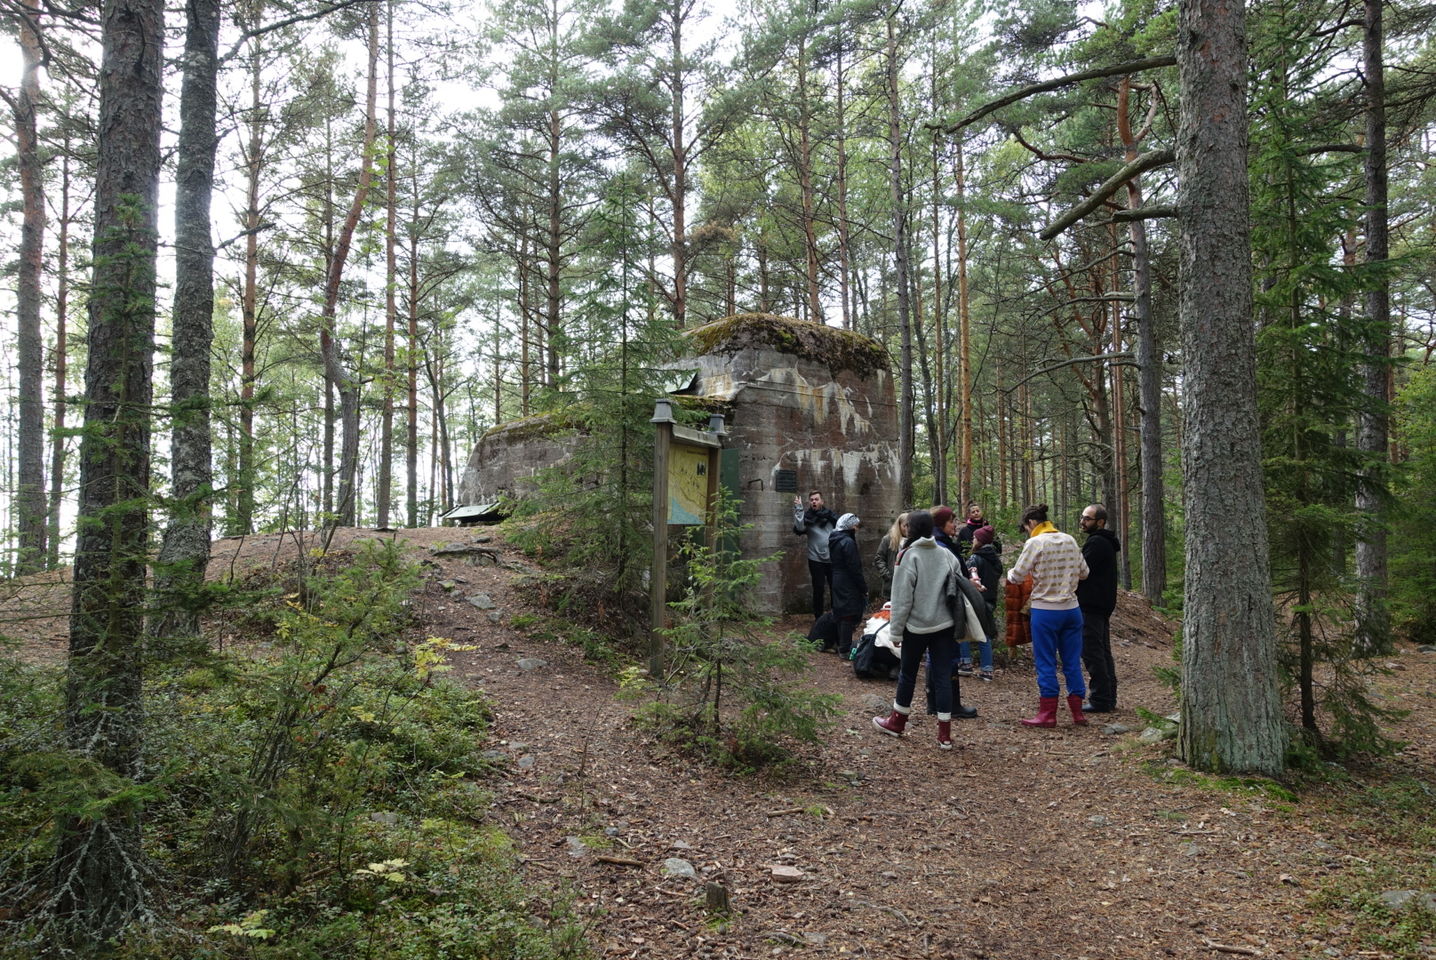 Students gather outside an old military bunker, in the middle of a forest, on the island of Reposaari